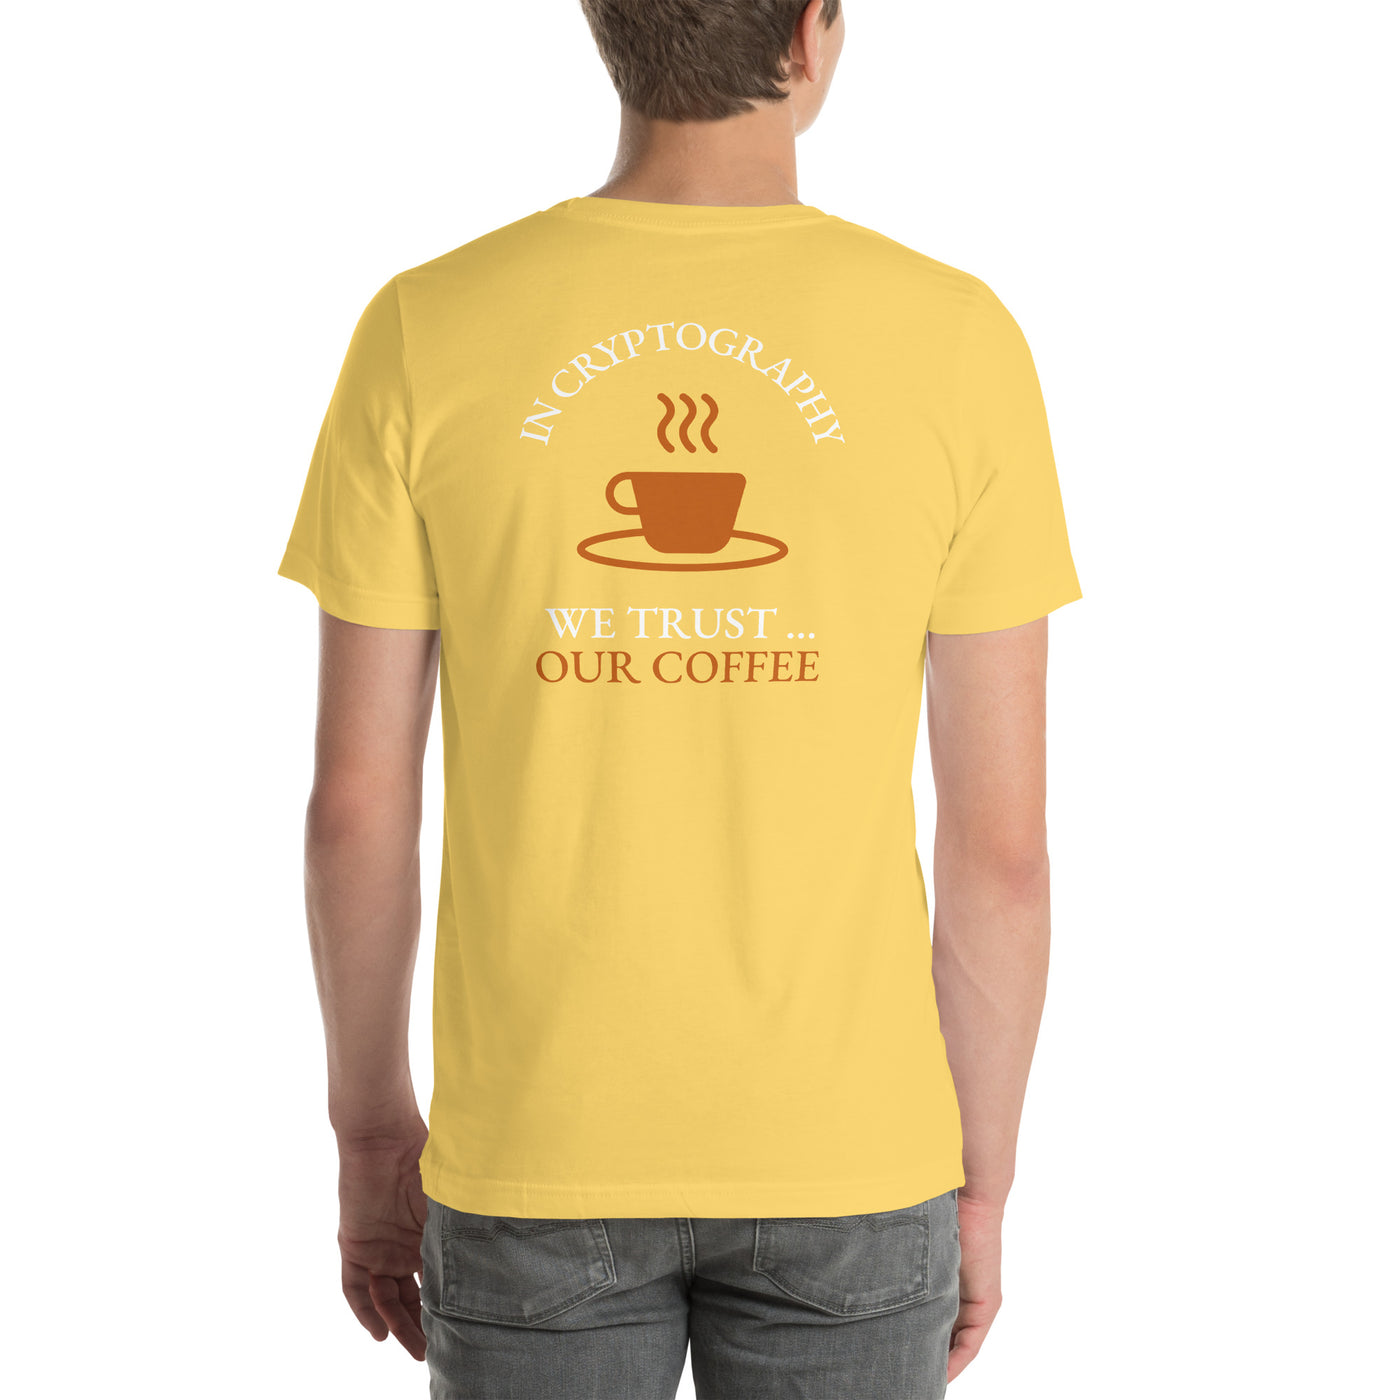 In cryptography, we trust... our coffee (Orange Text) - Unisex t-shirt ( Back Print )